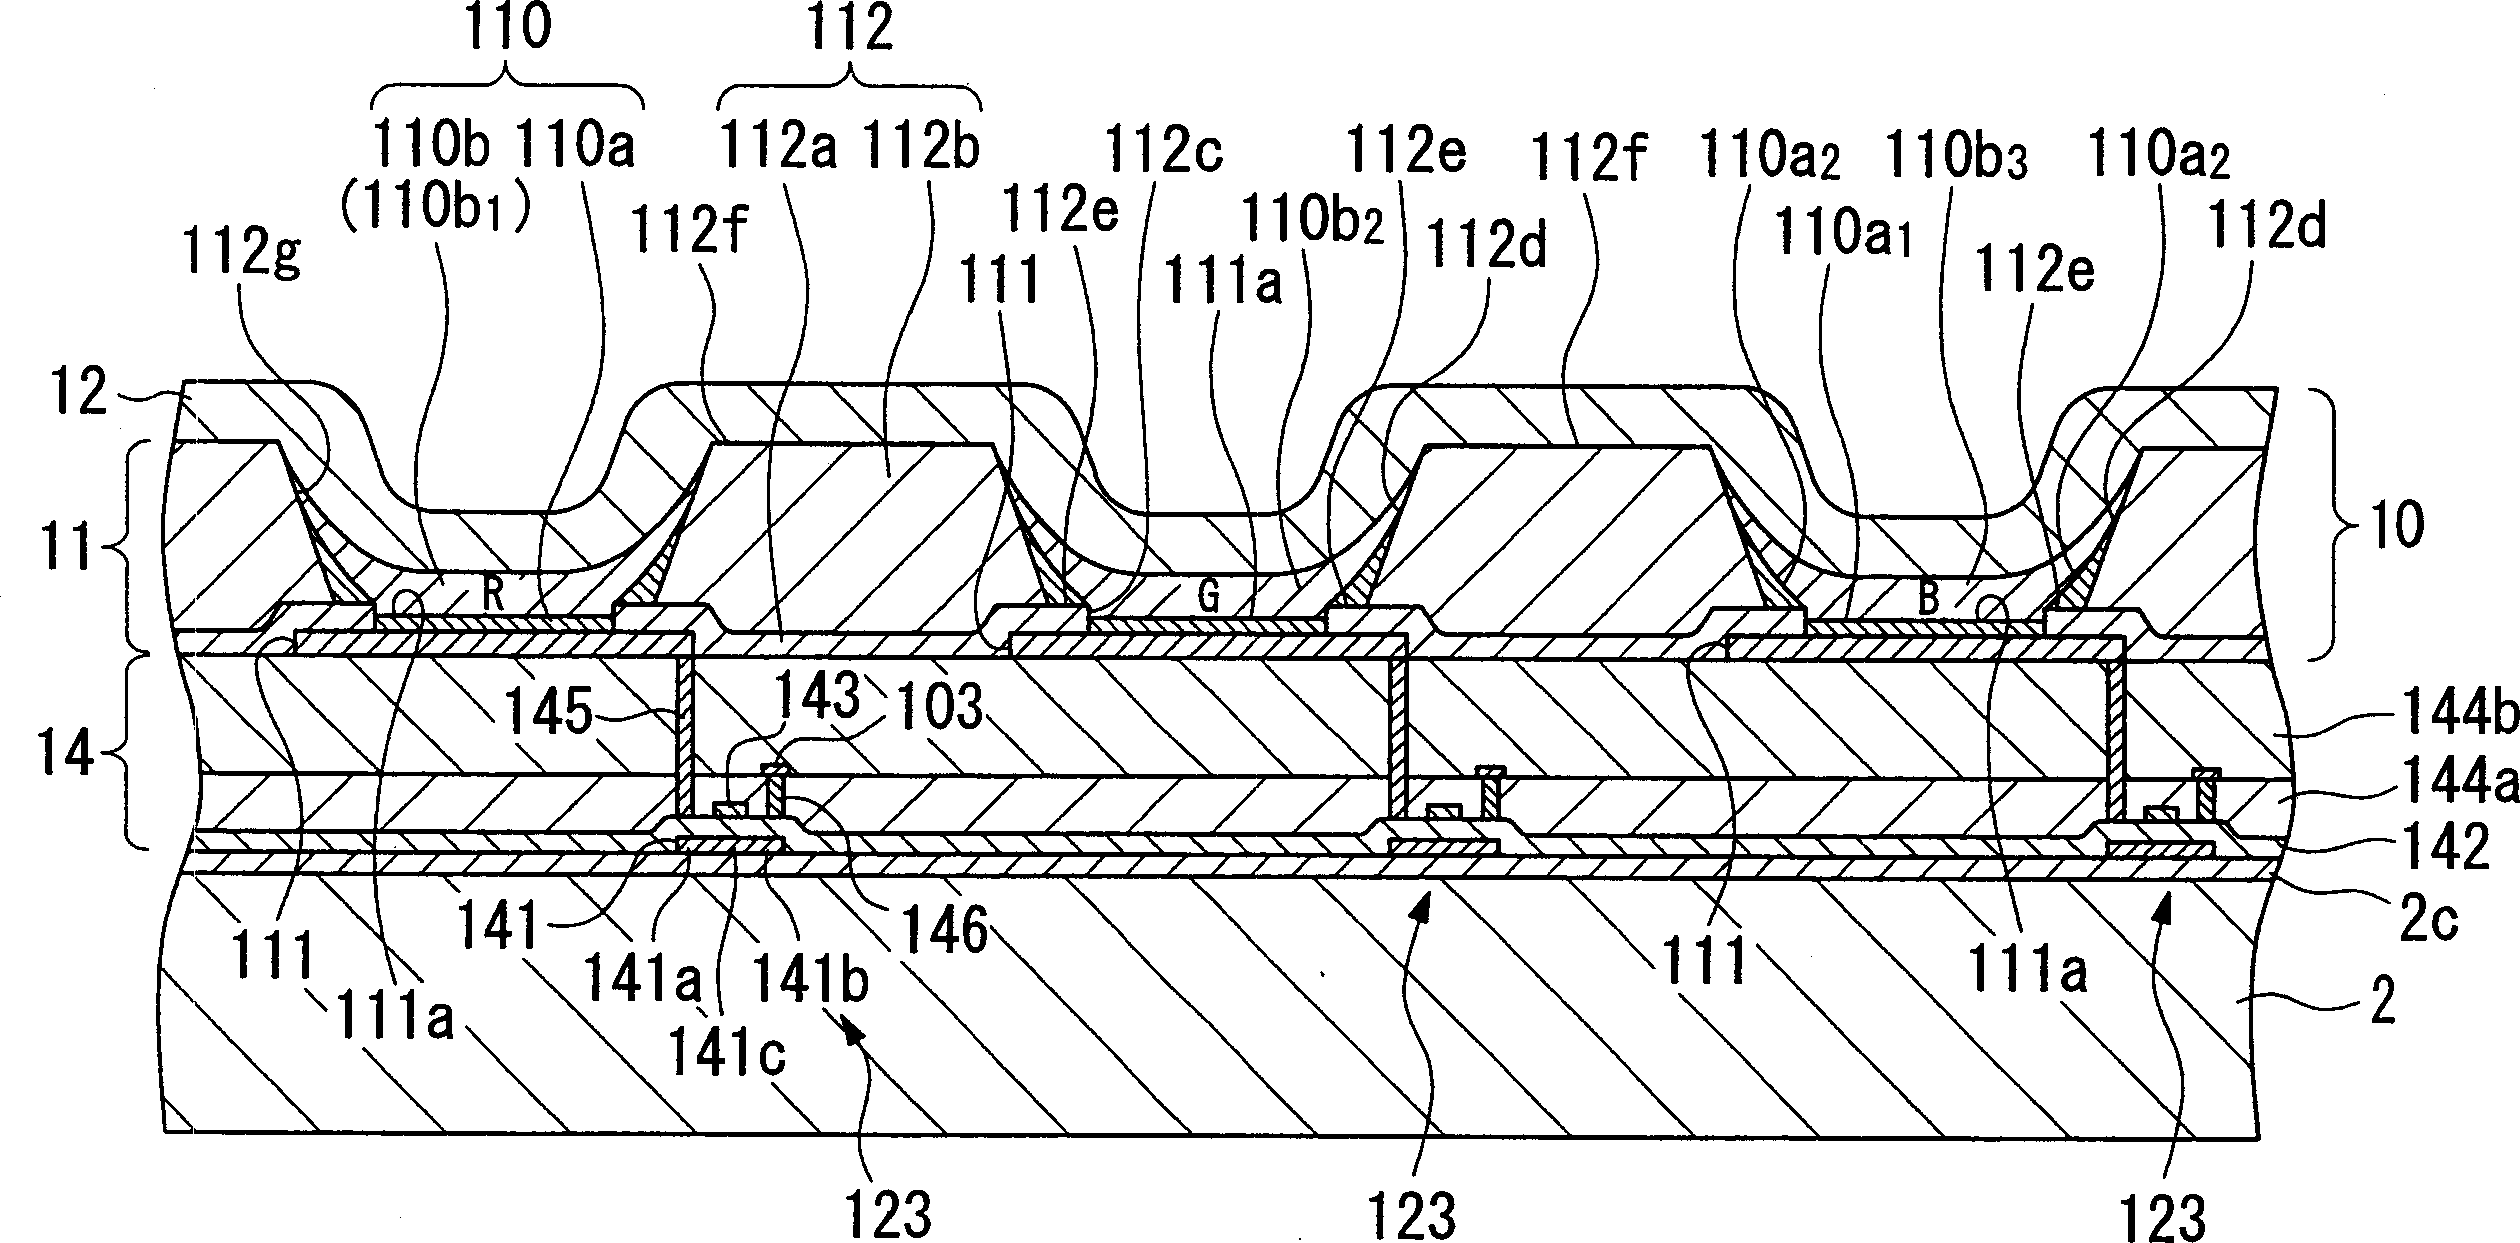 Display device, electronic apparatus and method for mfg. display device